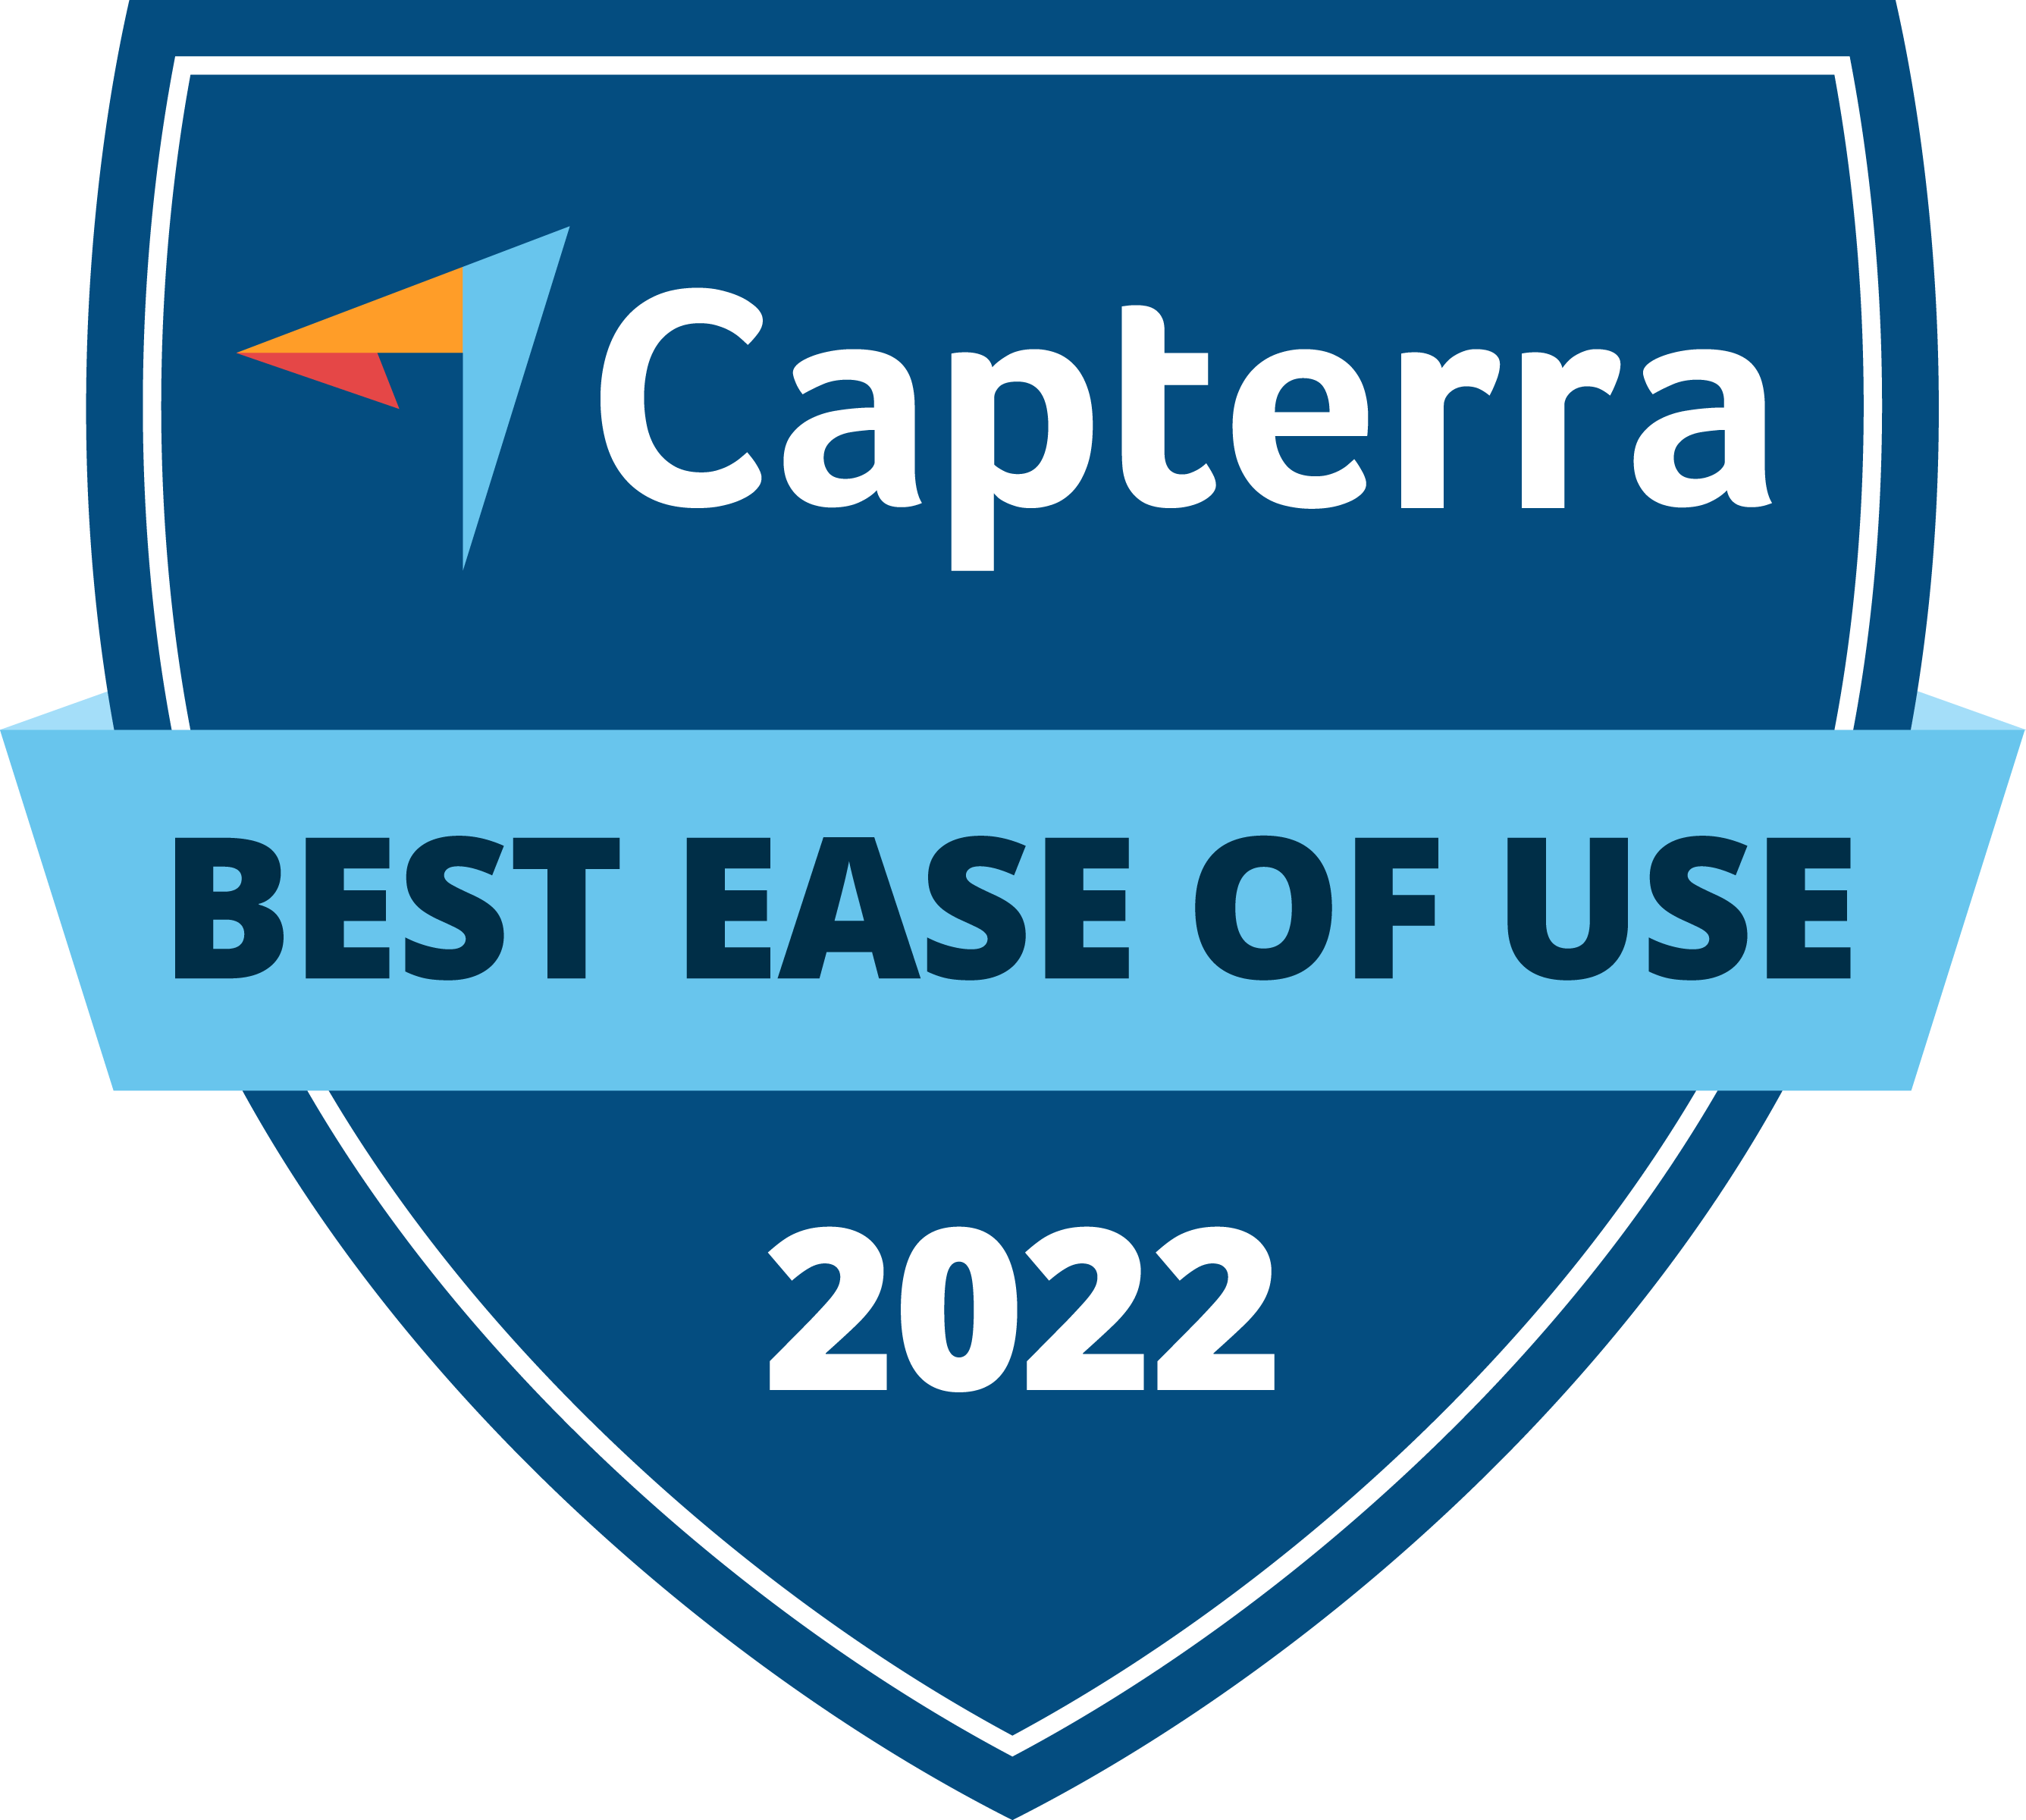 Capterra Best Ease of Use 2022